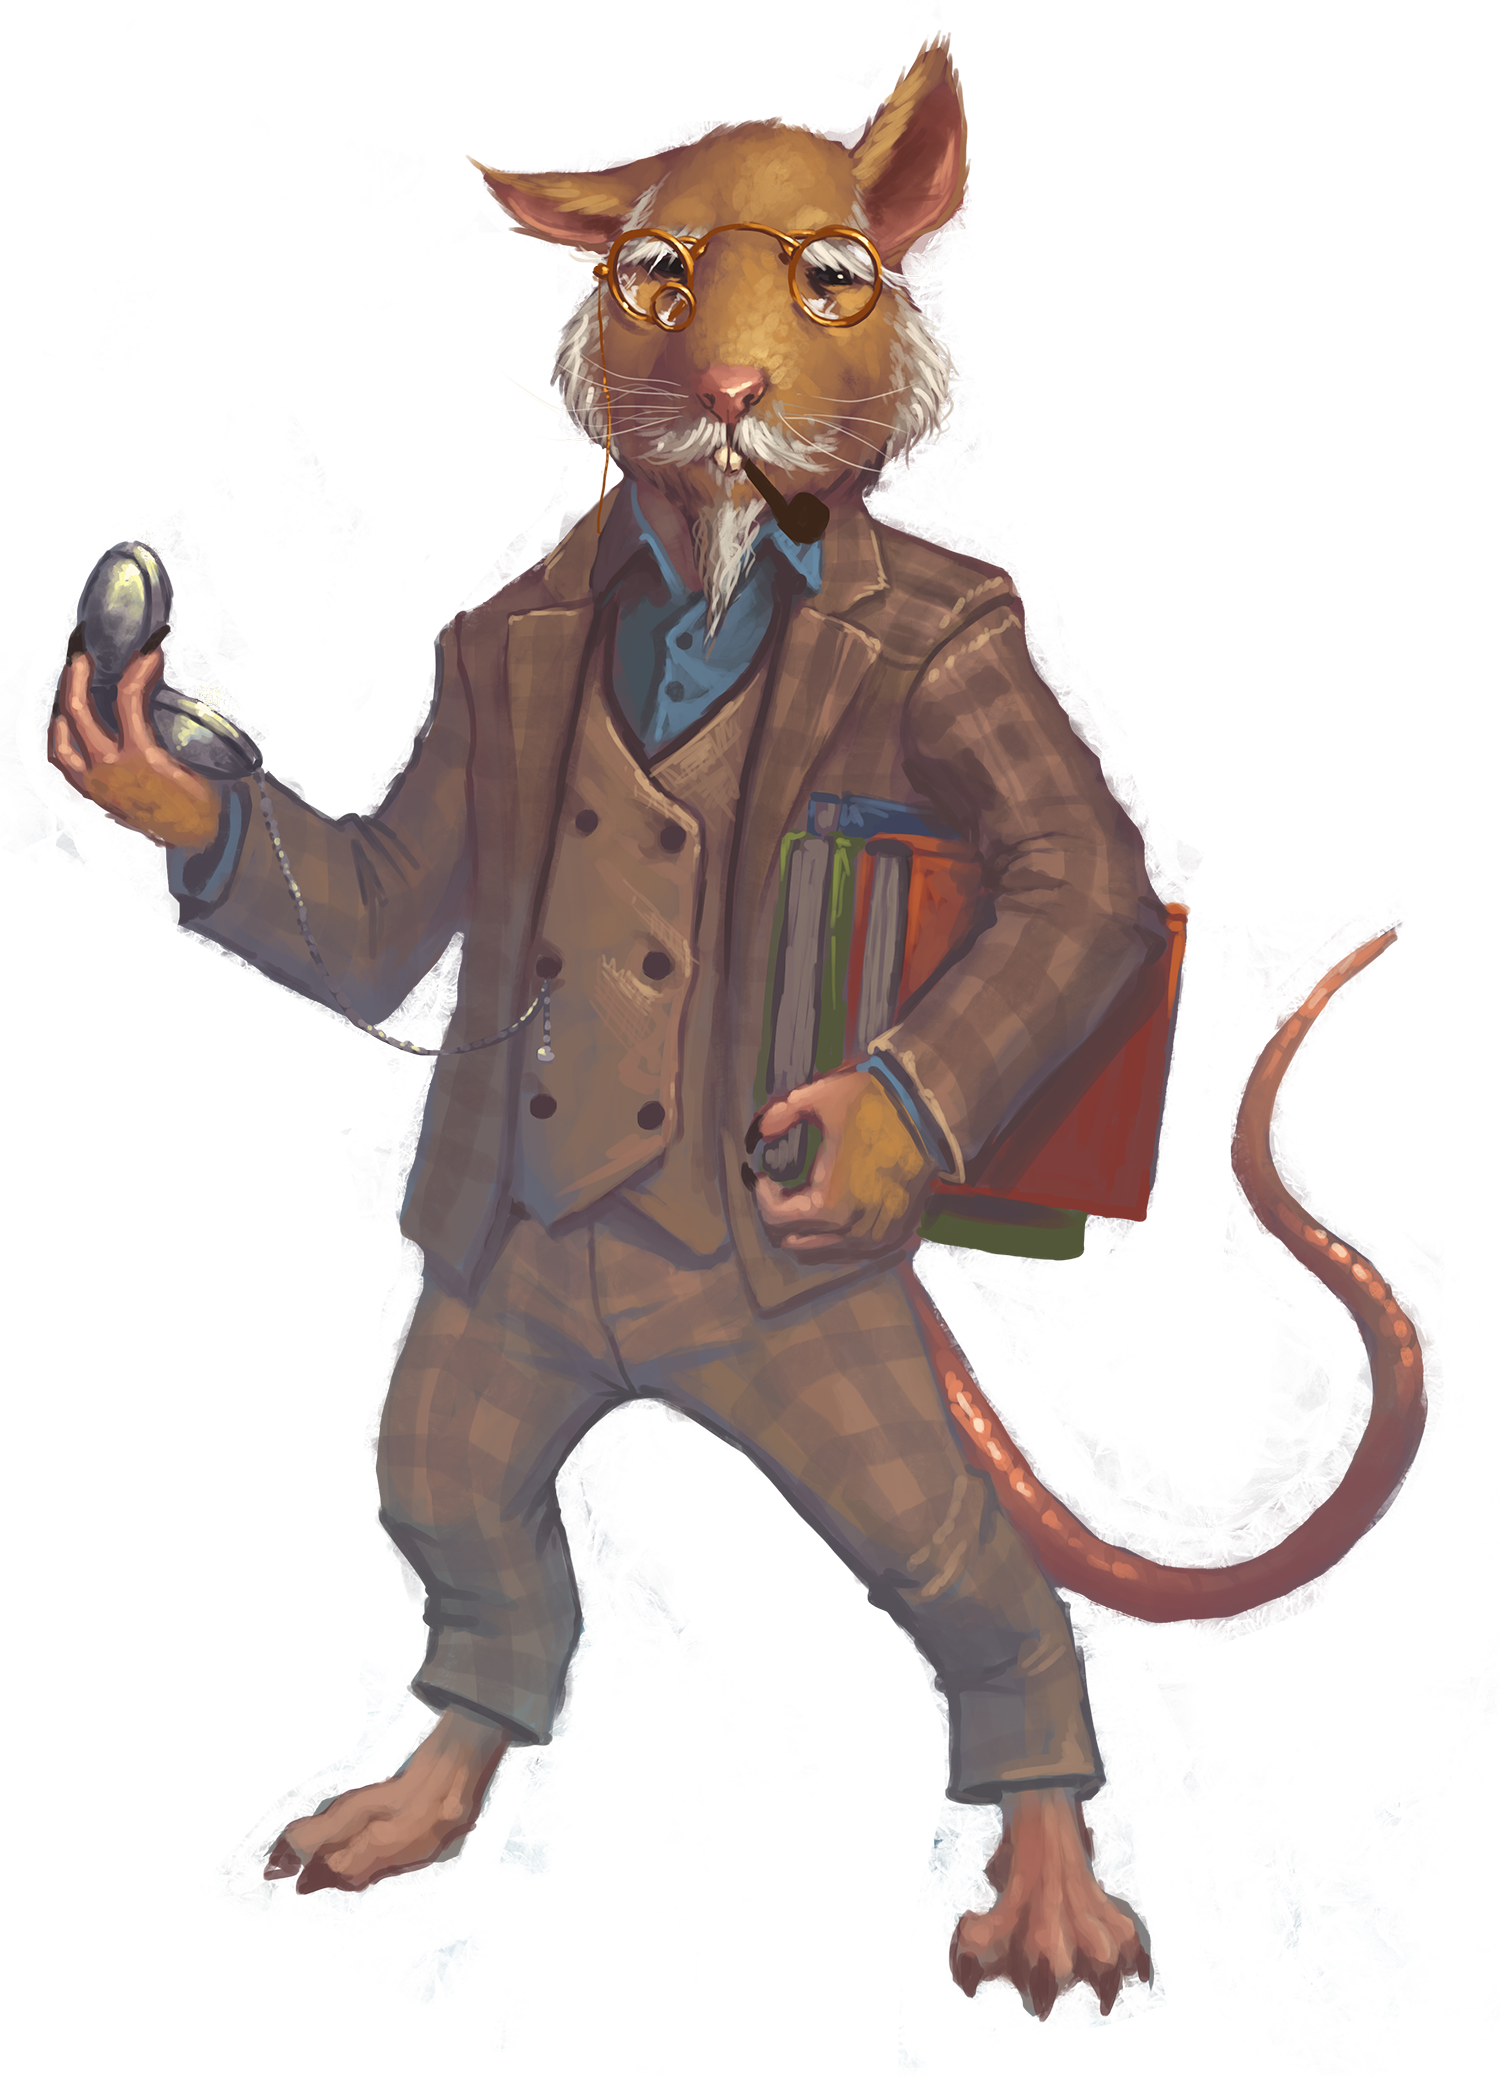 Artist Bruno Cesar: The ysoki Starfinder Royo stands dressed in an old-fashioned tweed suit, clutching old books under one arm and examining a pocket watch.